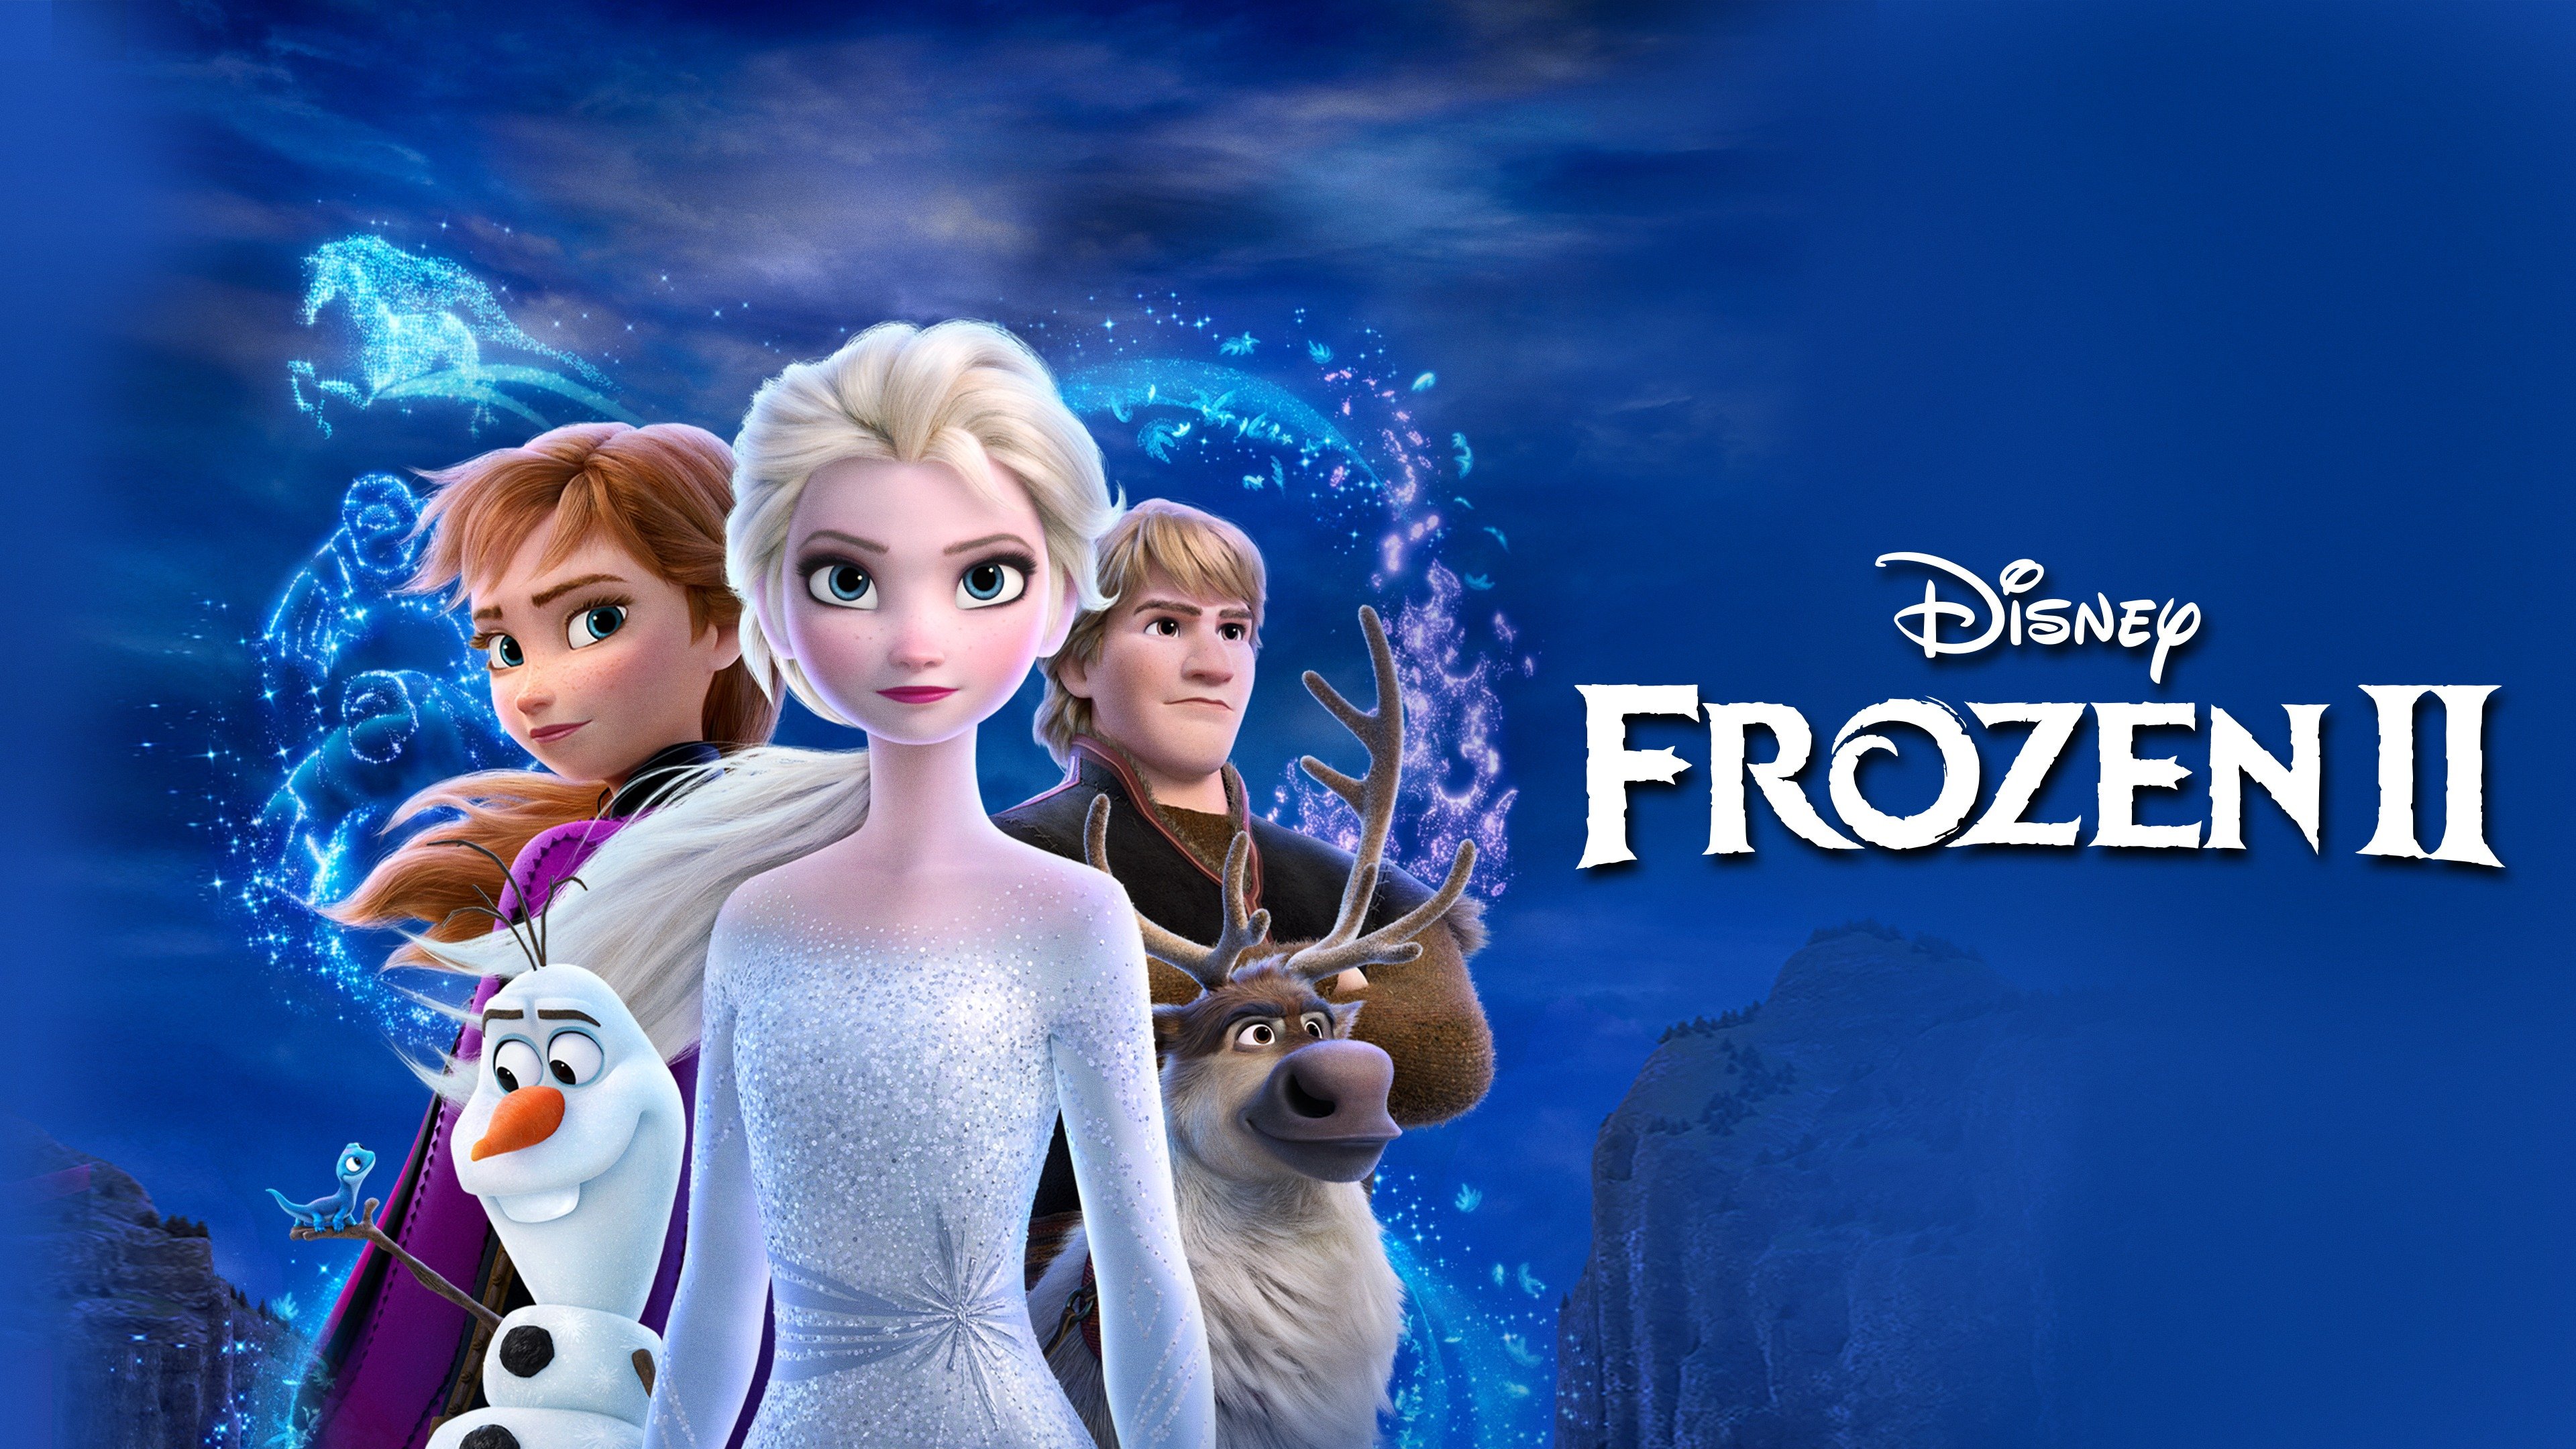 Experts warn: 'Don't let your child watch Disney's Frozen' - Closer